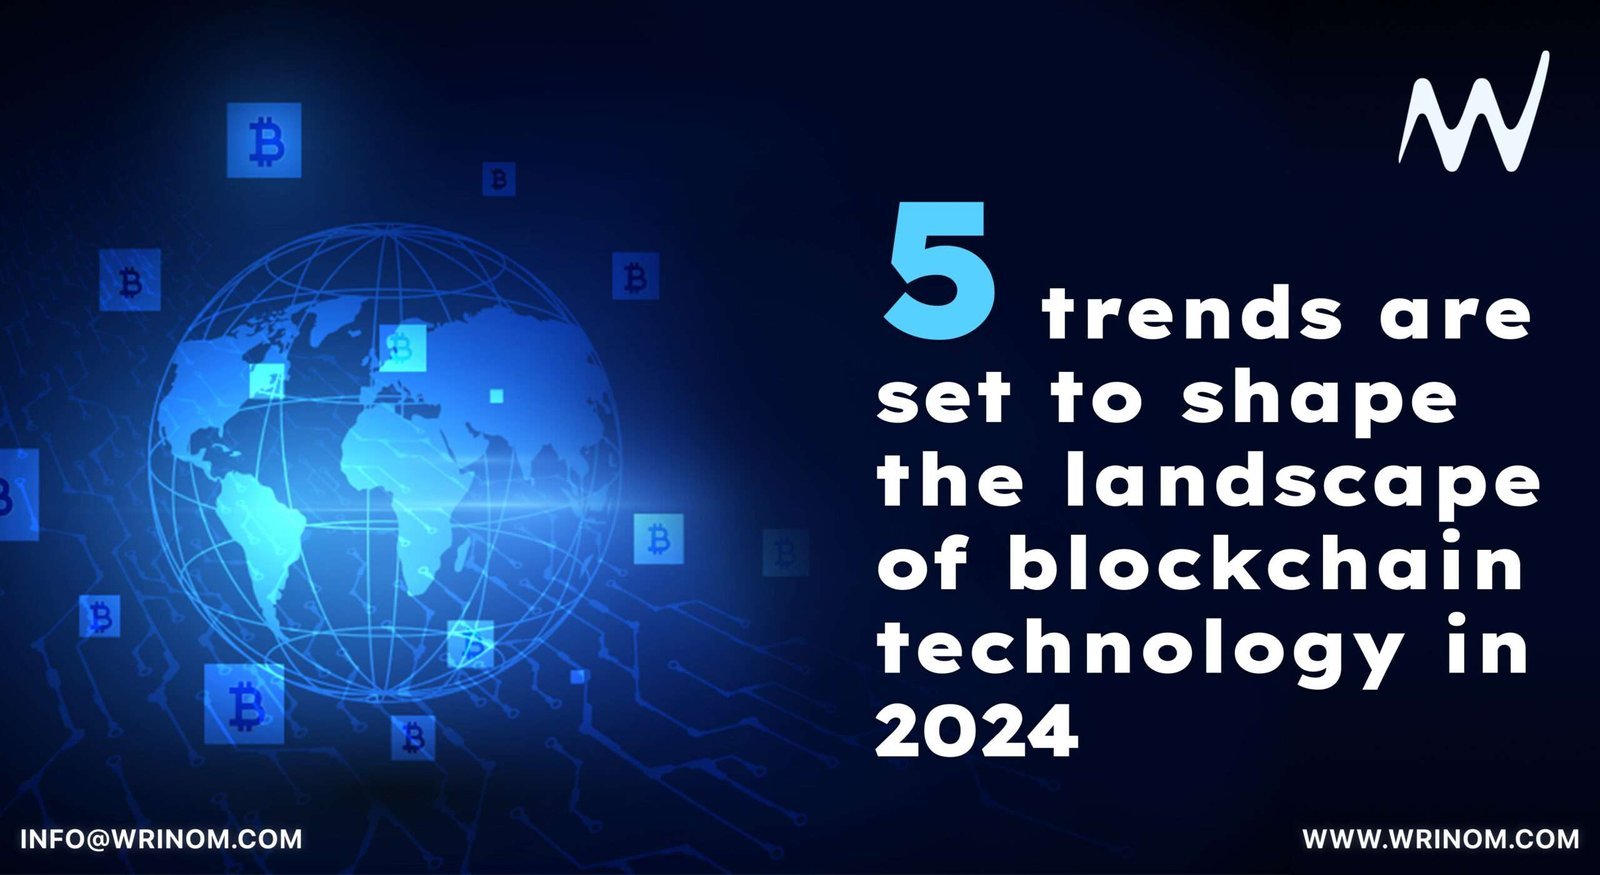 5 trends are set to shape the landscape of blockchain technology in 2024 IMG